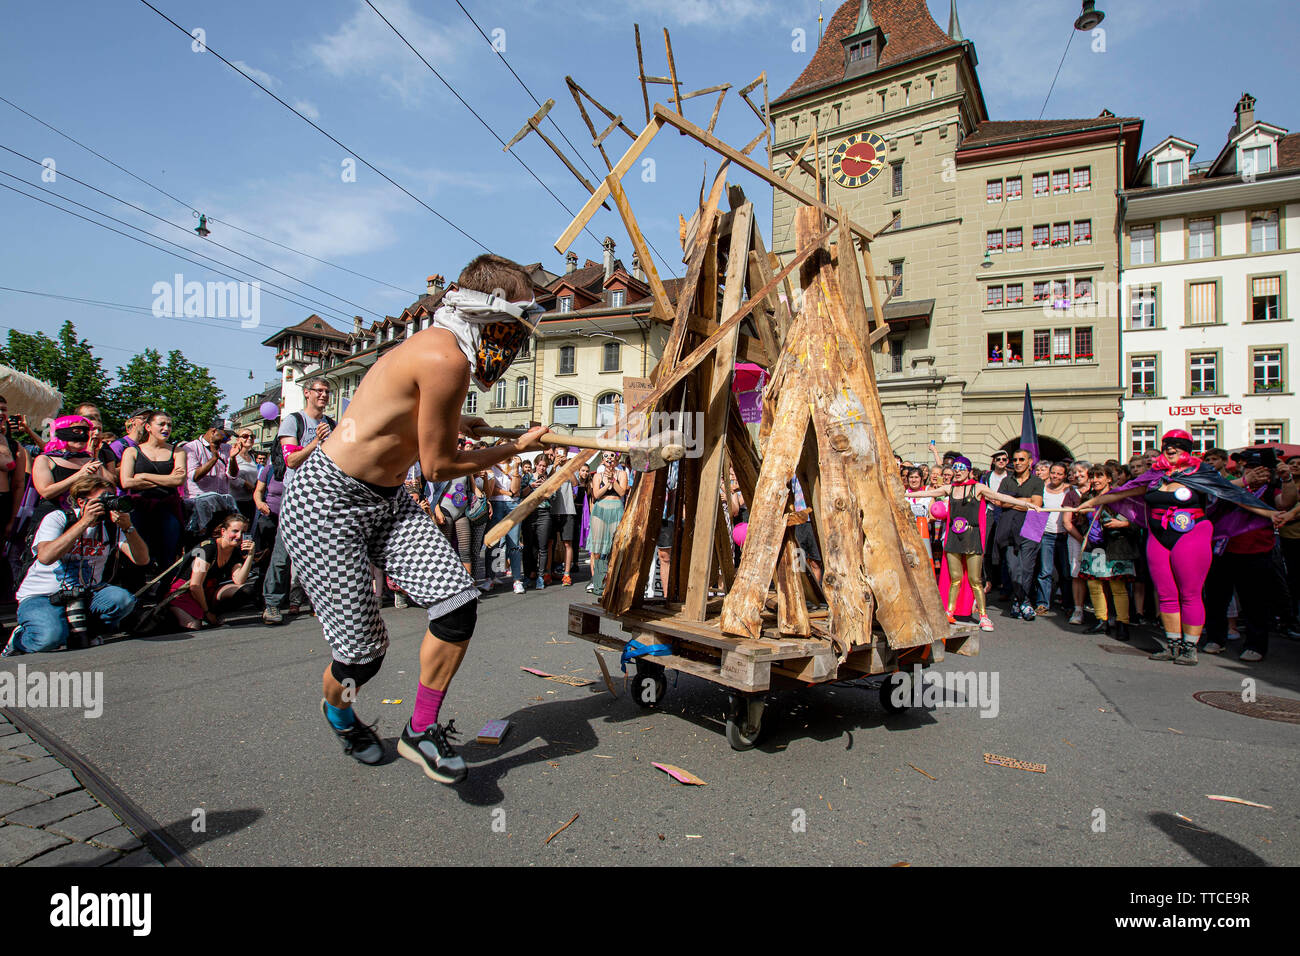 Participants in the Women's Strike in Bern smash an effigy of the Patriarchy using sledgehammers. The Frauenstreik - Womens Strike - brought record numbers of women to the streets in all the big cities in Switzerland. In the capitol Bern, more than 40.000 marched throughout the city to fight for gender equality. Stock Photo